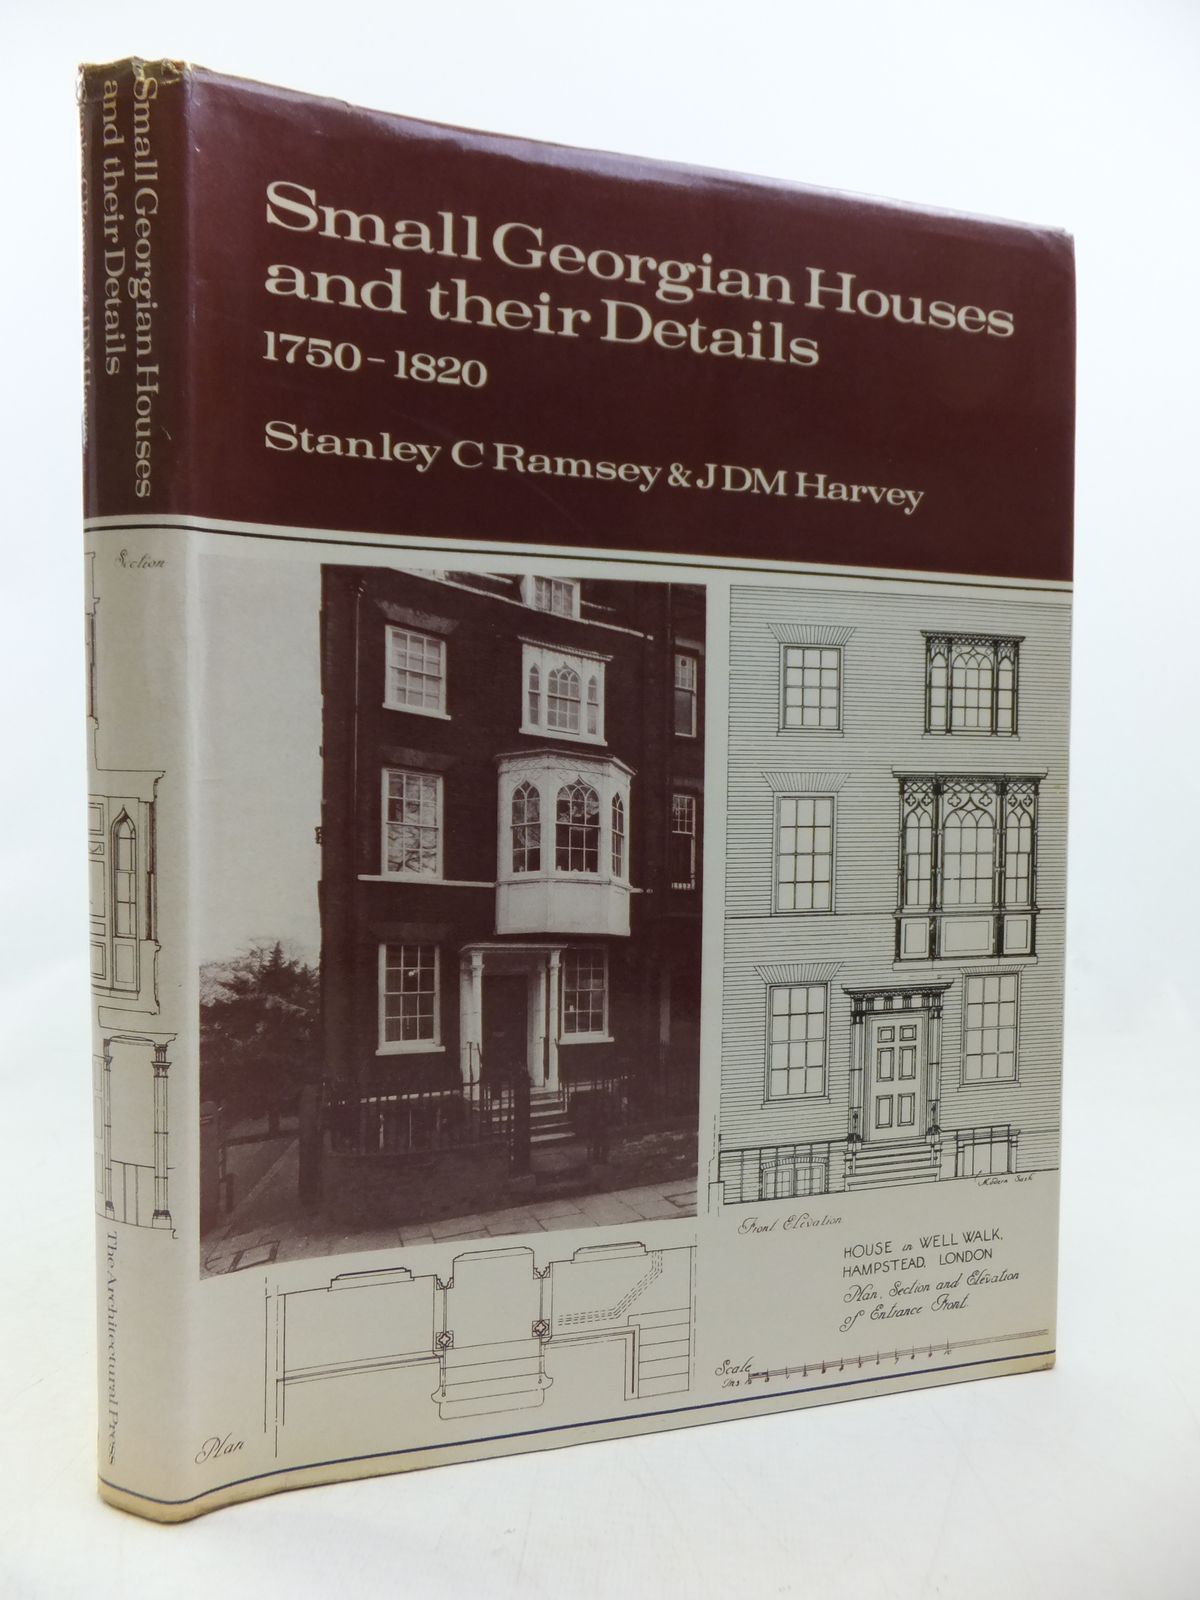 Small Georgian Houses And Their Details 1750-1820